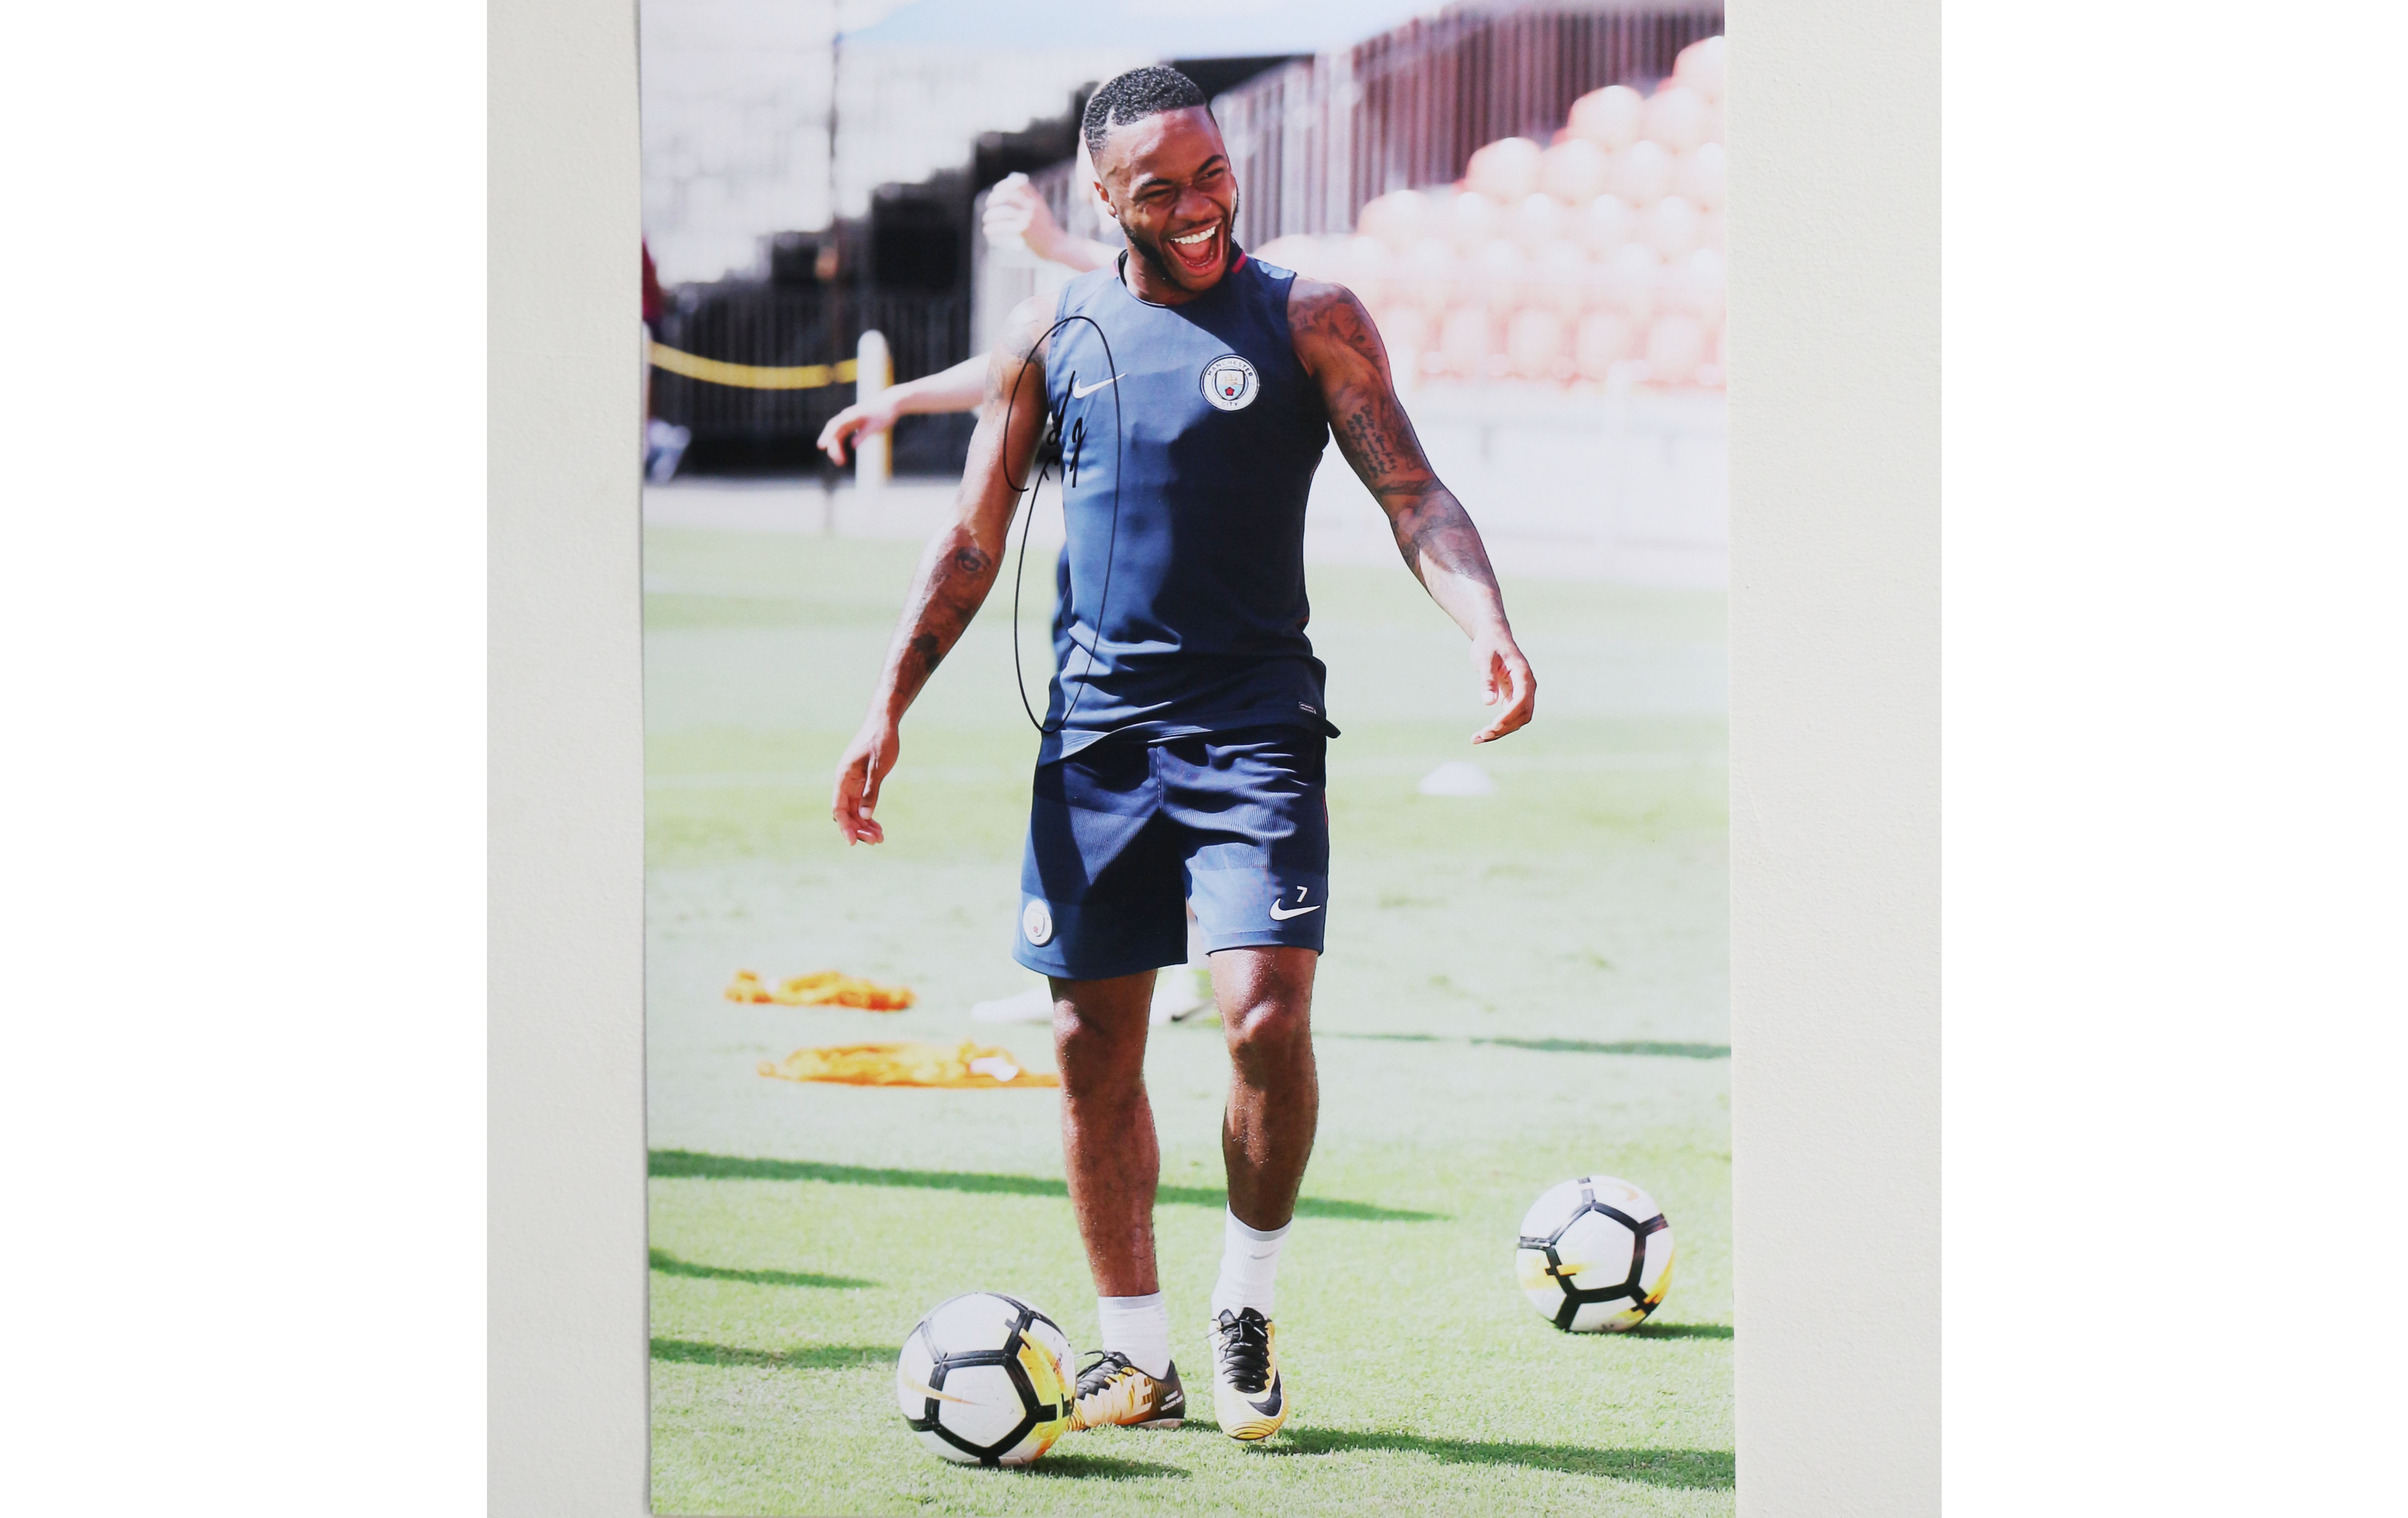 Raheem Sterling Training Manchester City A2 Signed Photograph